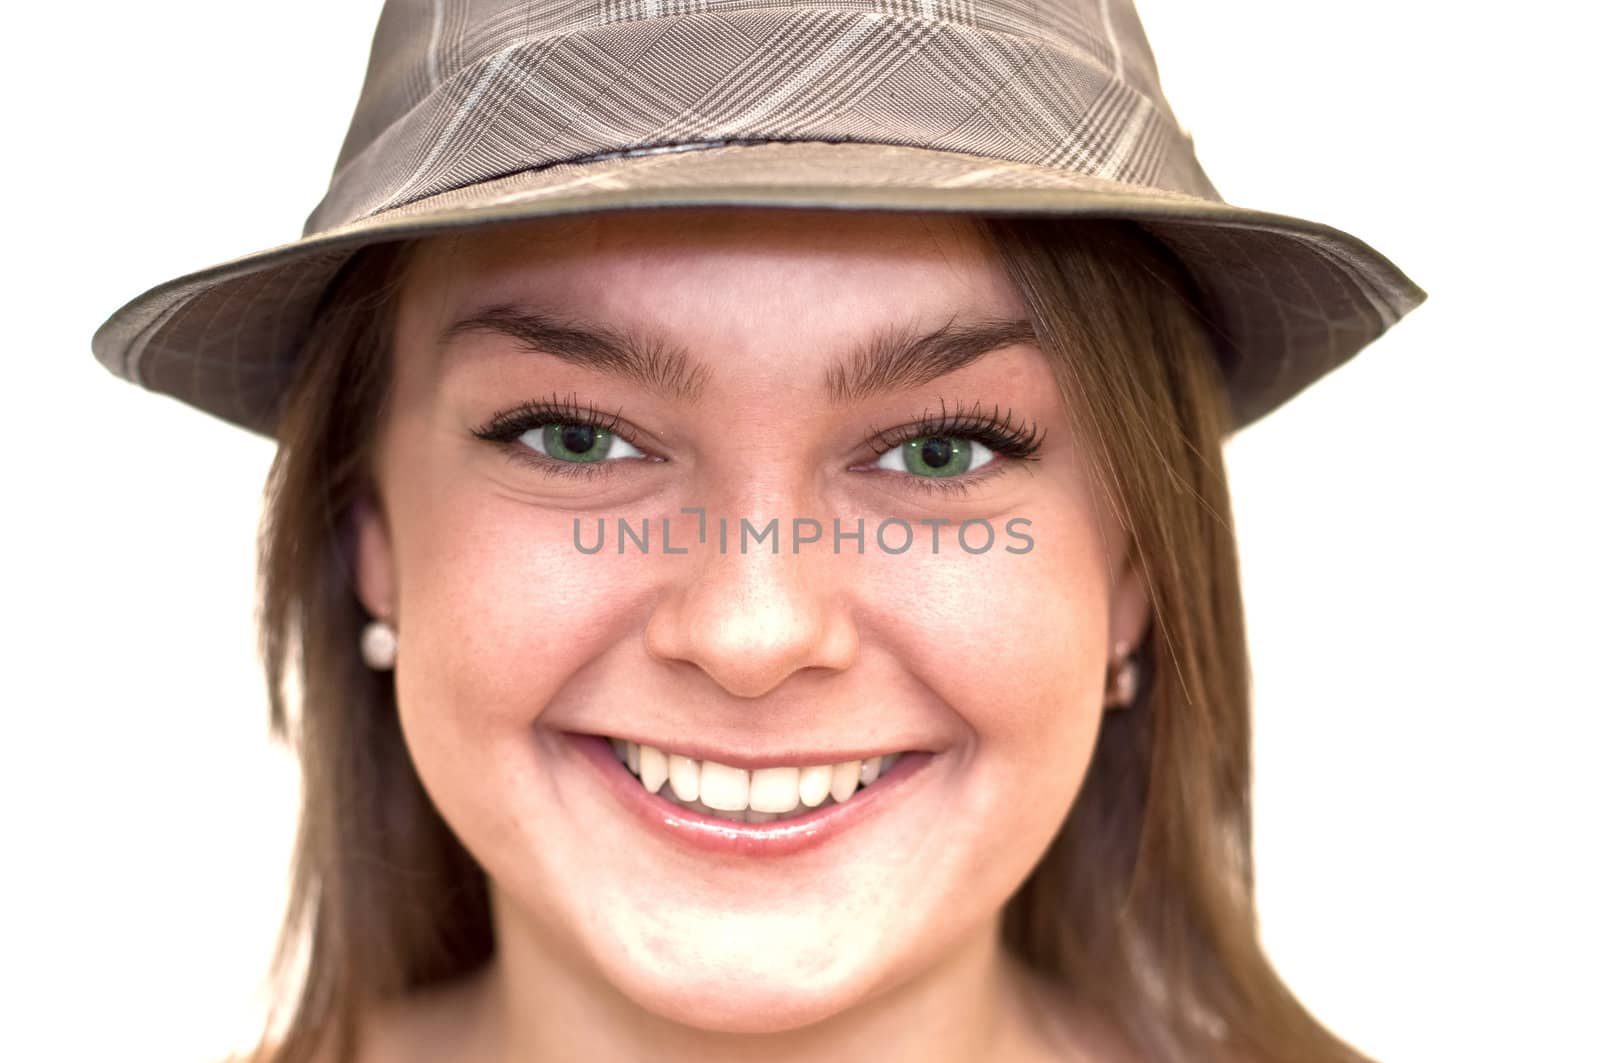 Beautiful young woman with green eyes wearing a hat. Close-up, portrait. Isolated on a white background.